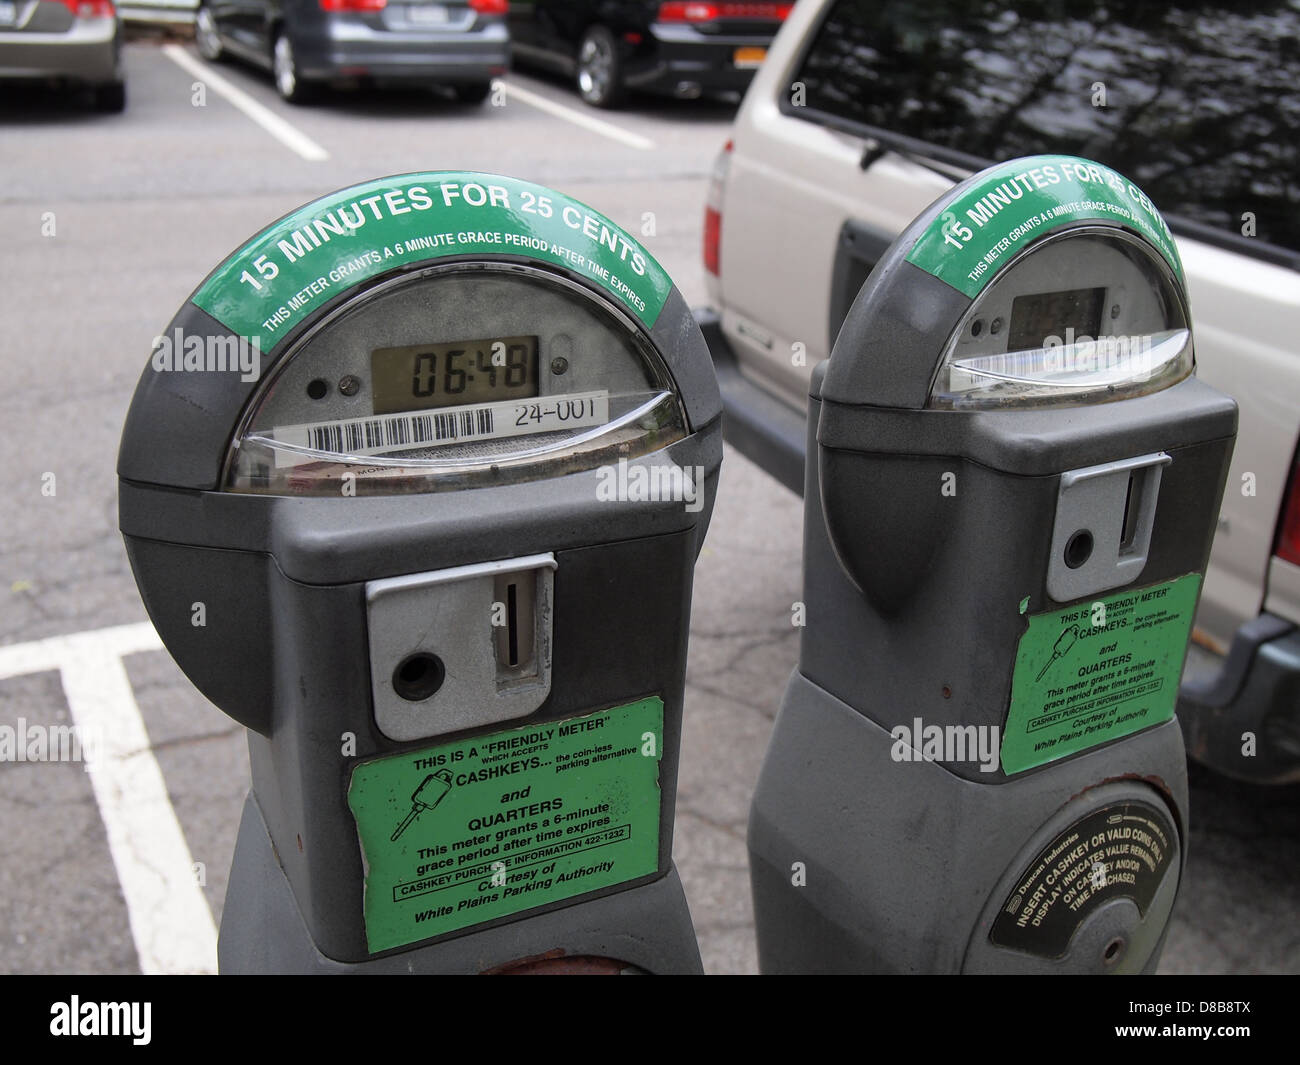 Coin operated parking meters near a commuter train station, White Plains, New  York, USA, May 22, 2013, © Katharine Andriotis Stock Photo - Alamy